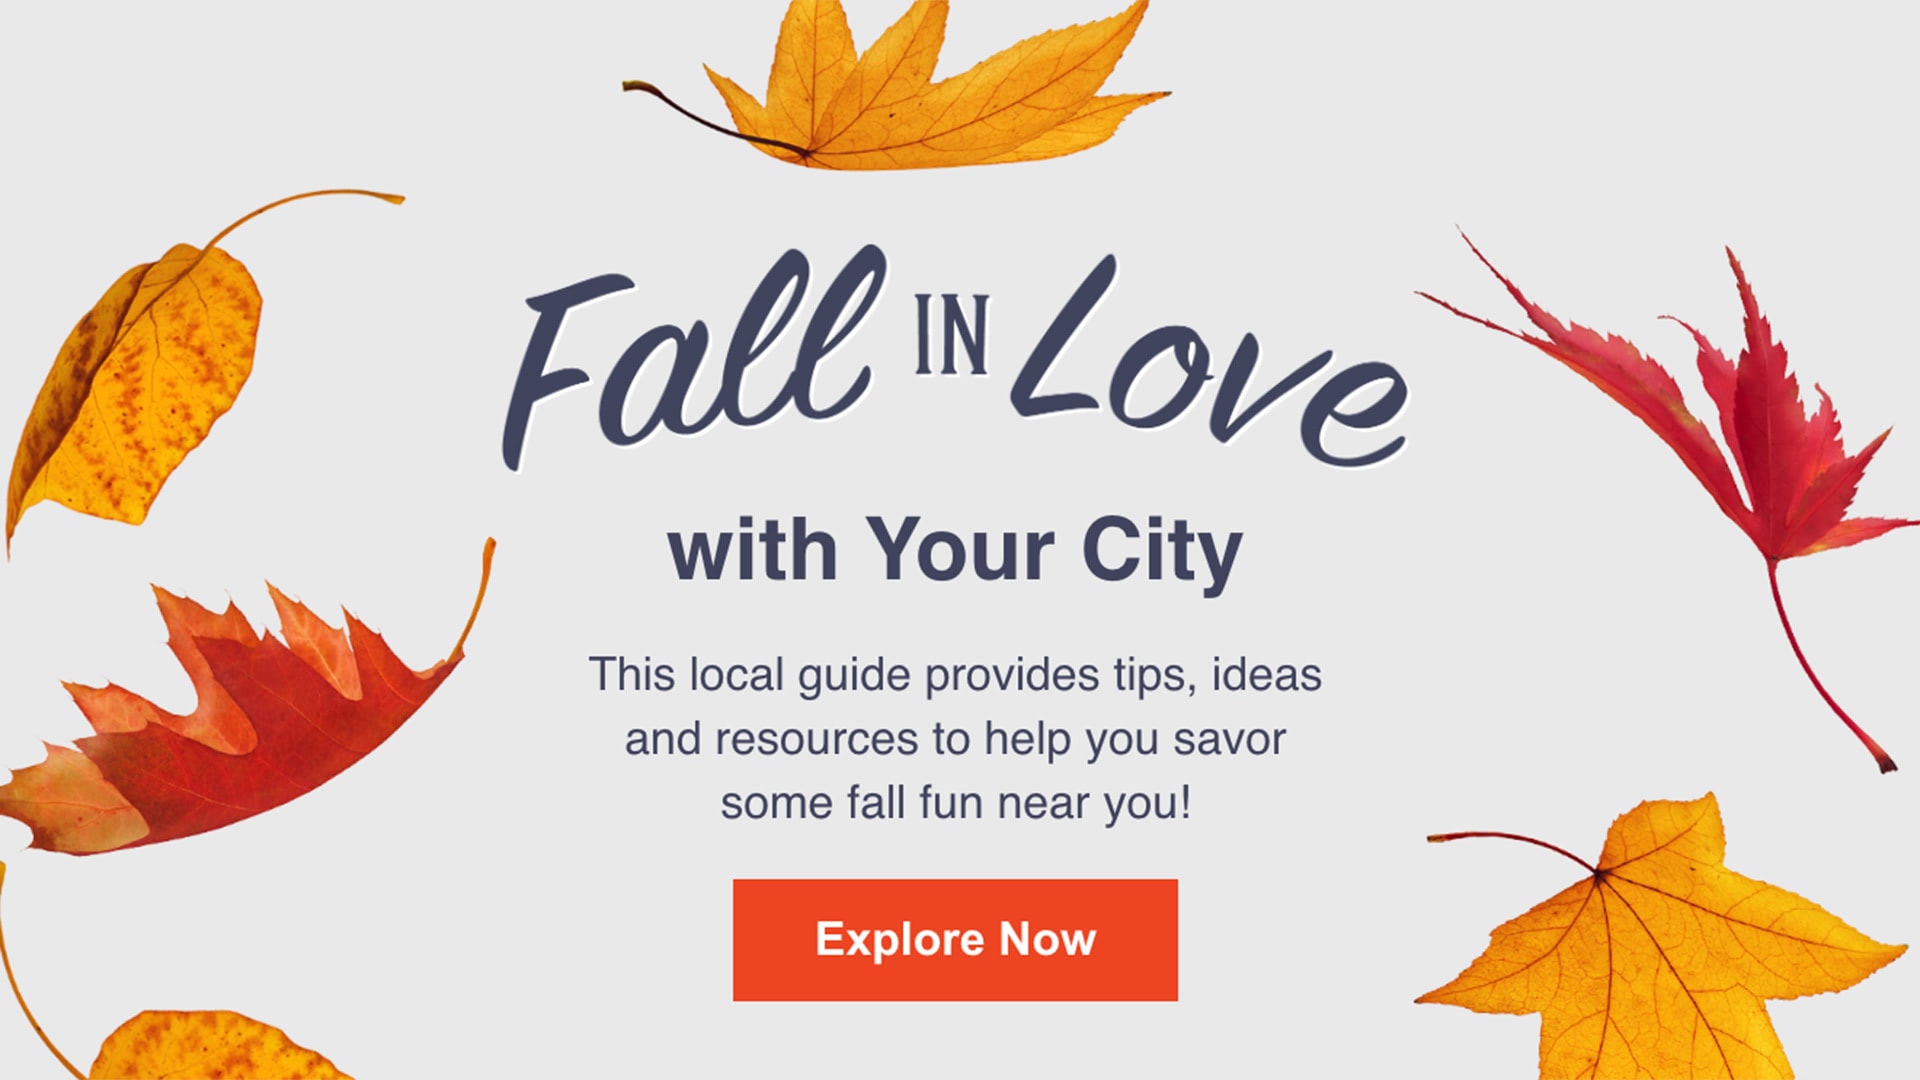 Visual Arts Examples Of Great Fall Email Newsletters With Tips And Tricks Under One Ceiling